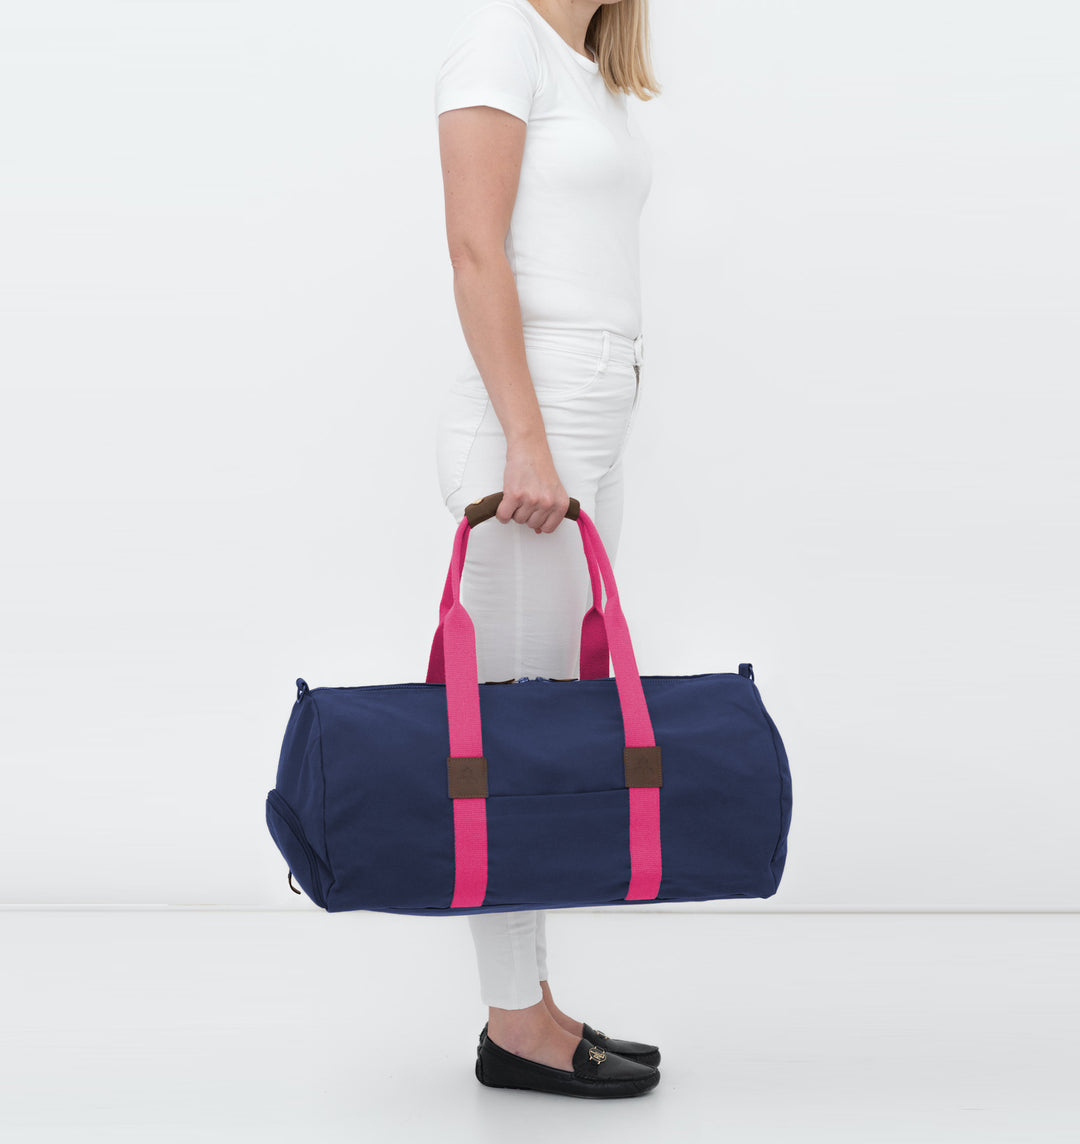 Duffle bag -M- NAVY with pink strap